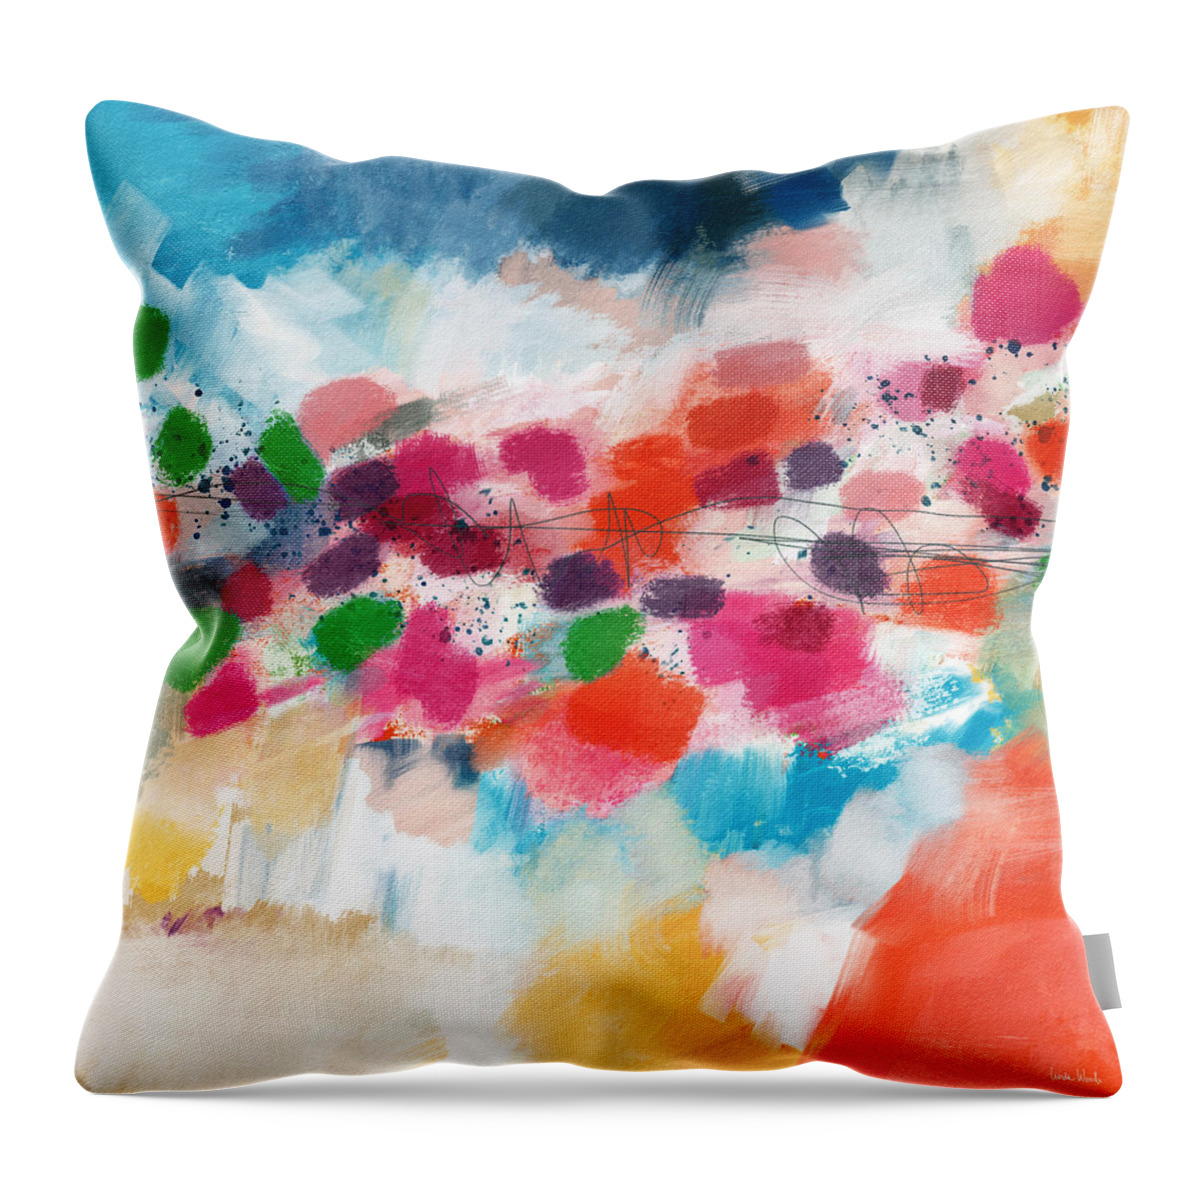 Abstract Throw Pillow featuring the mixed media Going Somewhere- Abstract Art by Linda Woods by Linda Woods